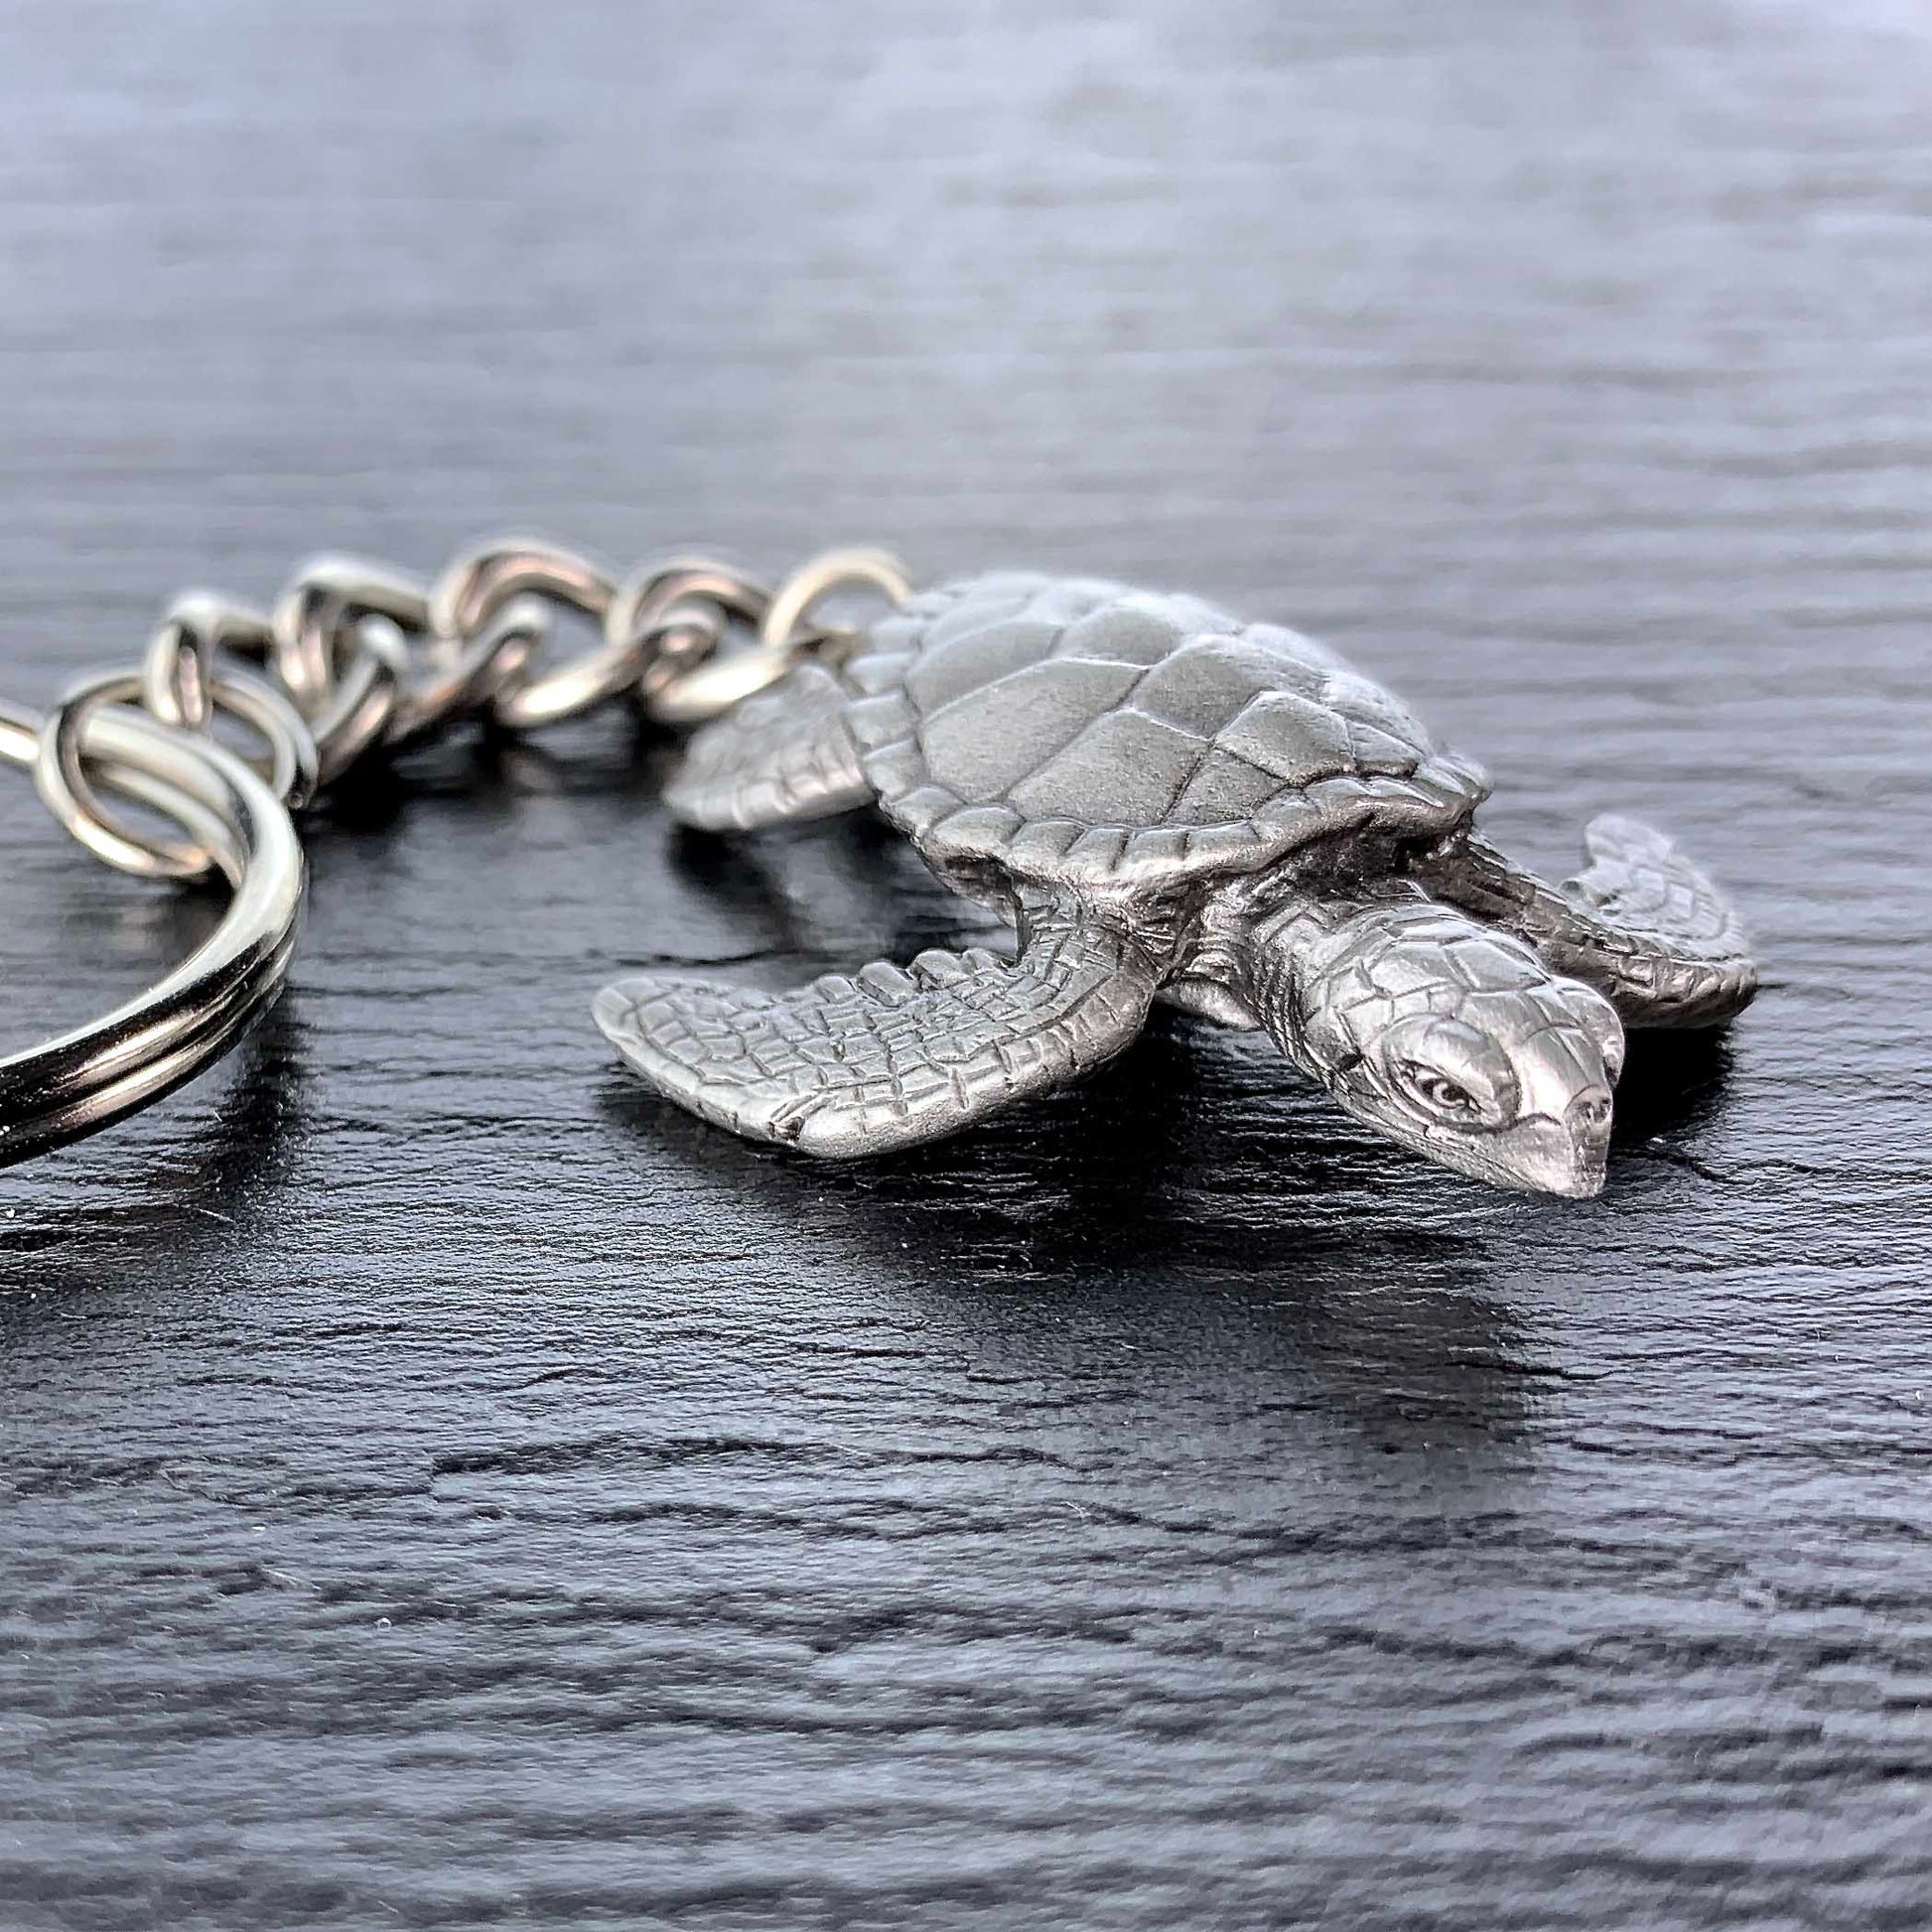 Turtle Keychain for Men and Women- Sea Turtle Key Fob, Gift for Turtle Lovers, Cute Turtle Keyring, Sea Life Key Chain, Scuba Gifts - The Tool Store